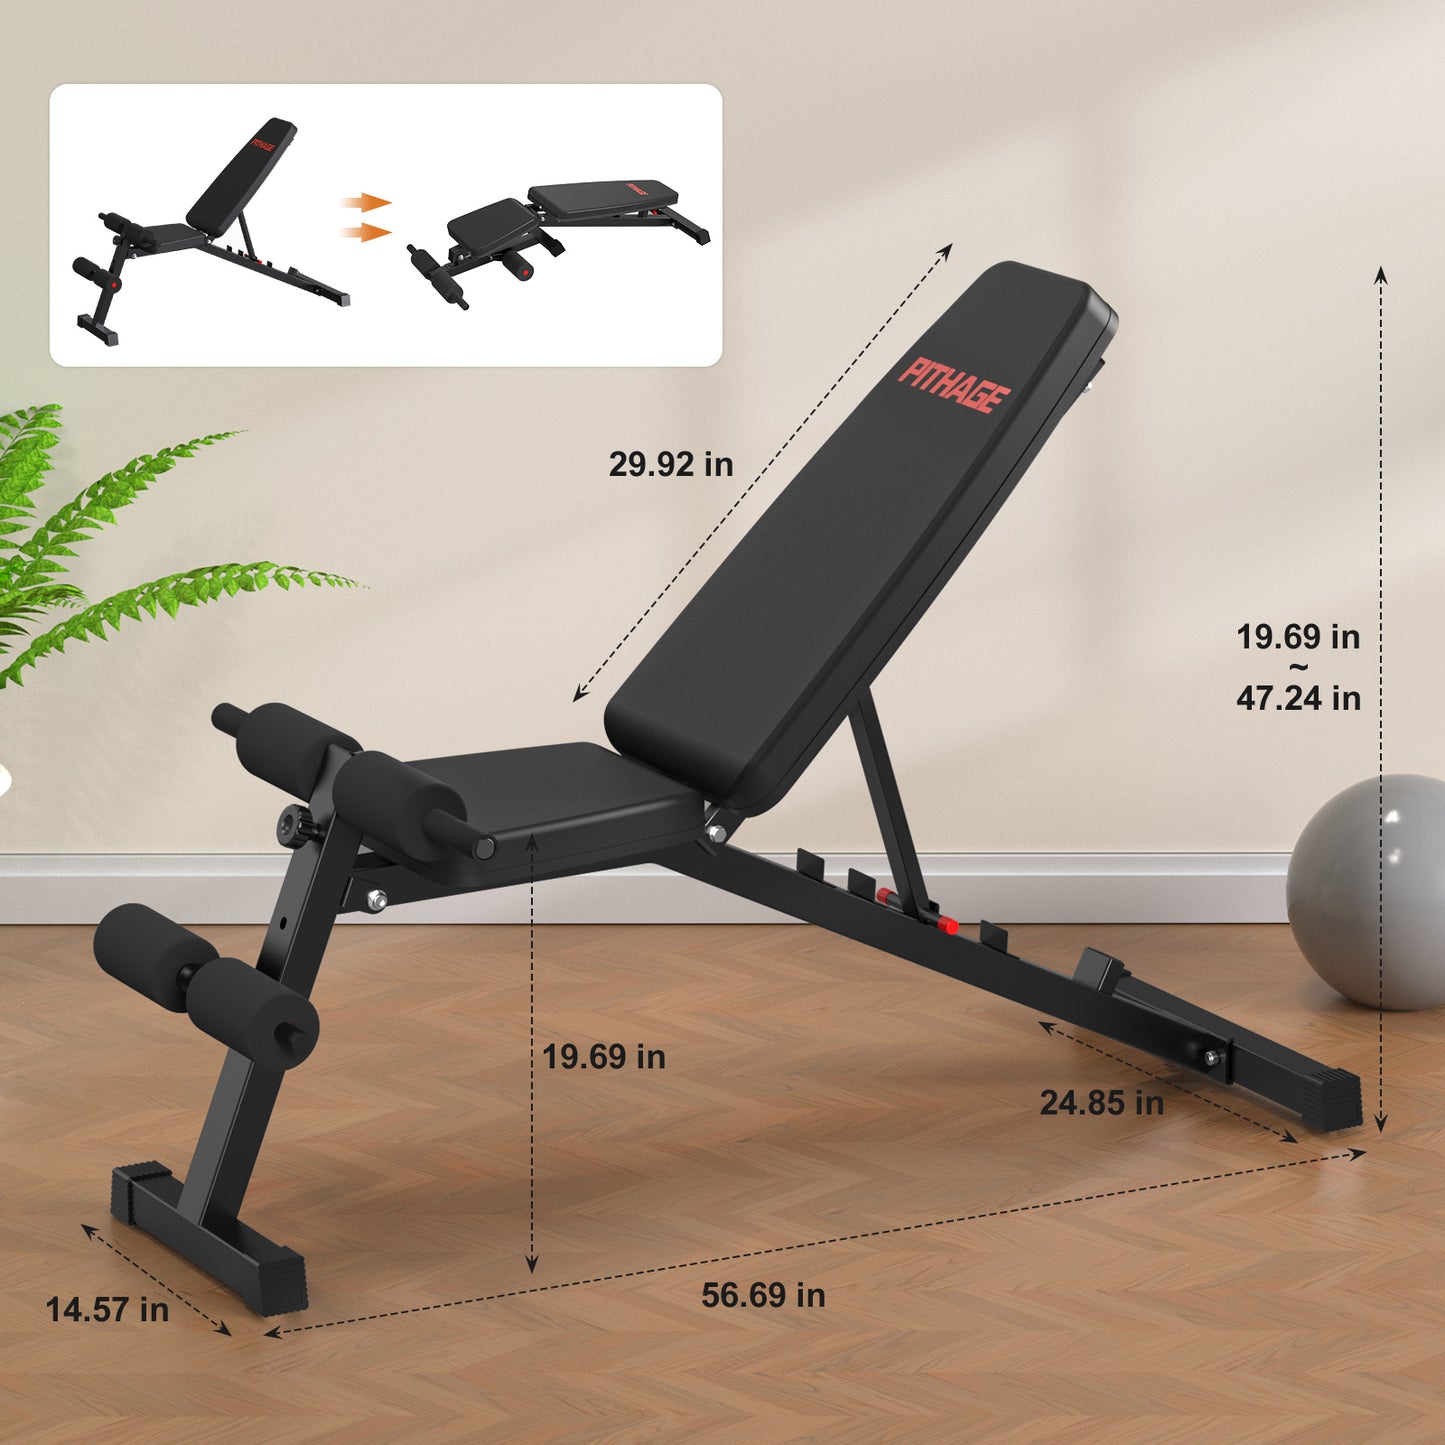 Foldable & Adjustable Workout Bench for Home Gym Strength Training